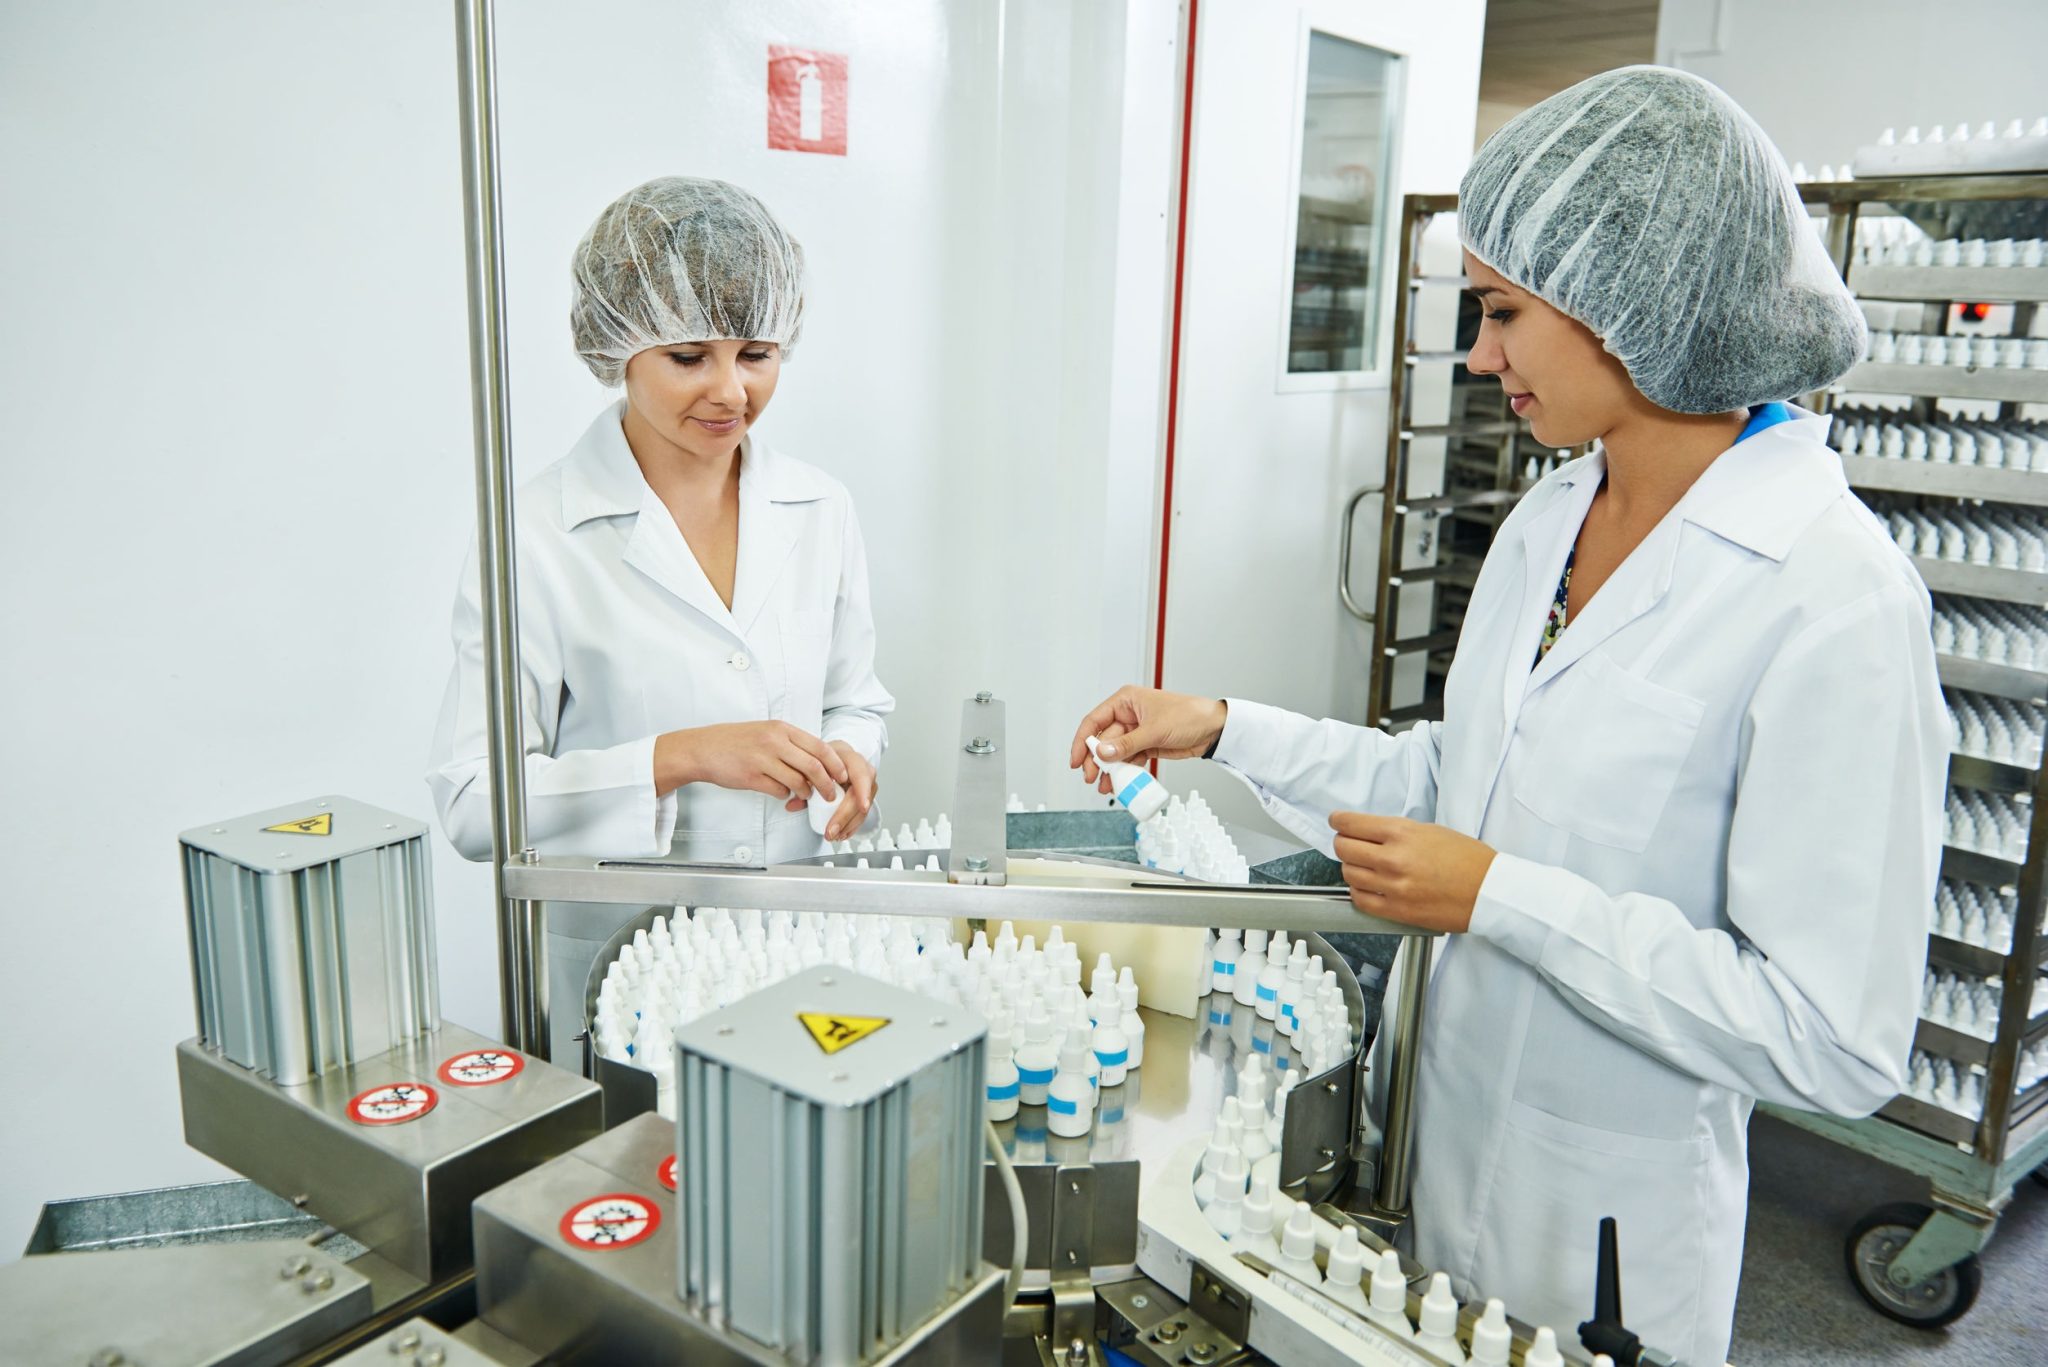 Pharmacists checking prescription bottles being produced in a compounding facility